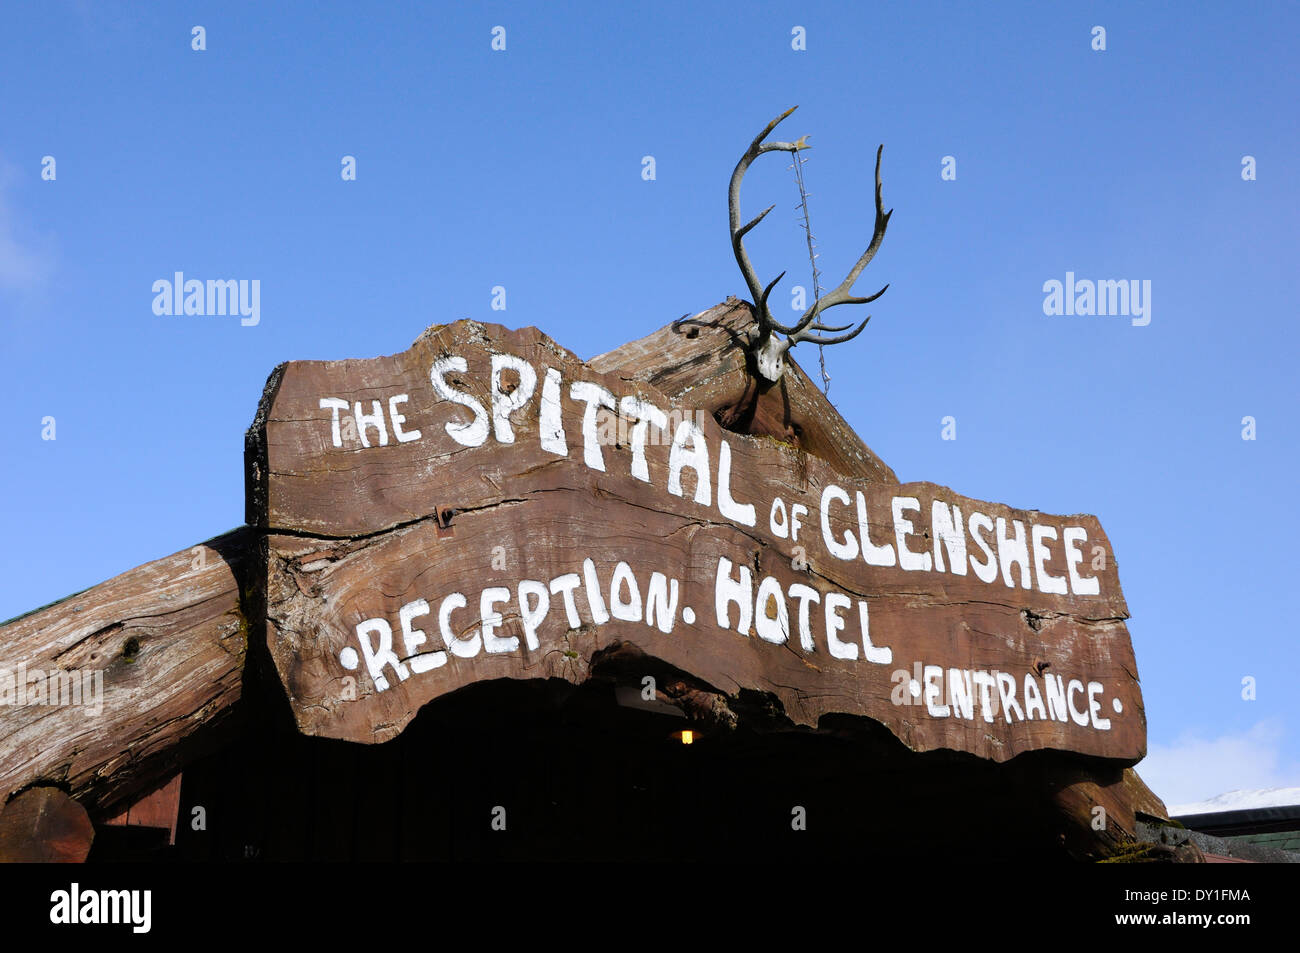 The entrance sign to the Spittal of Glenshee Hotel, Scotland. Stock Photo